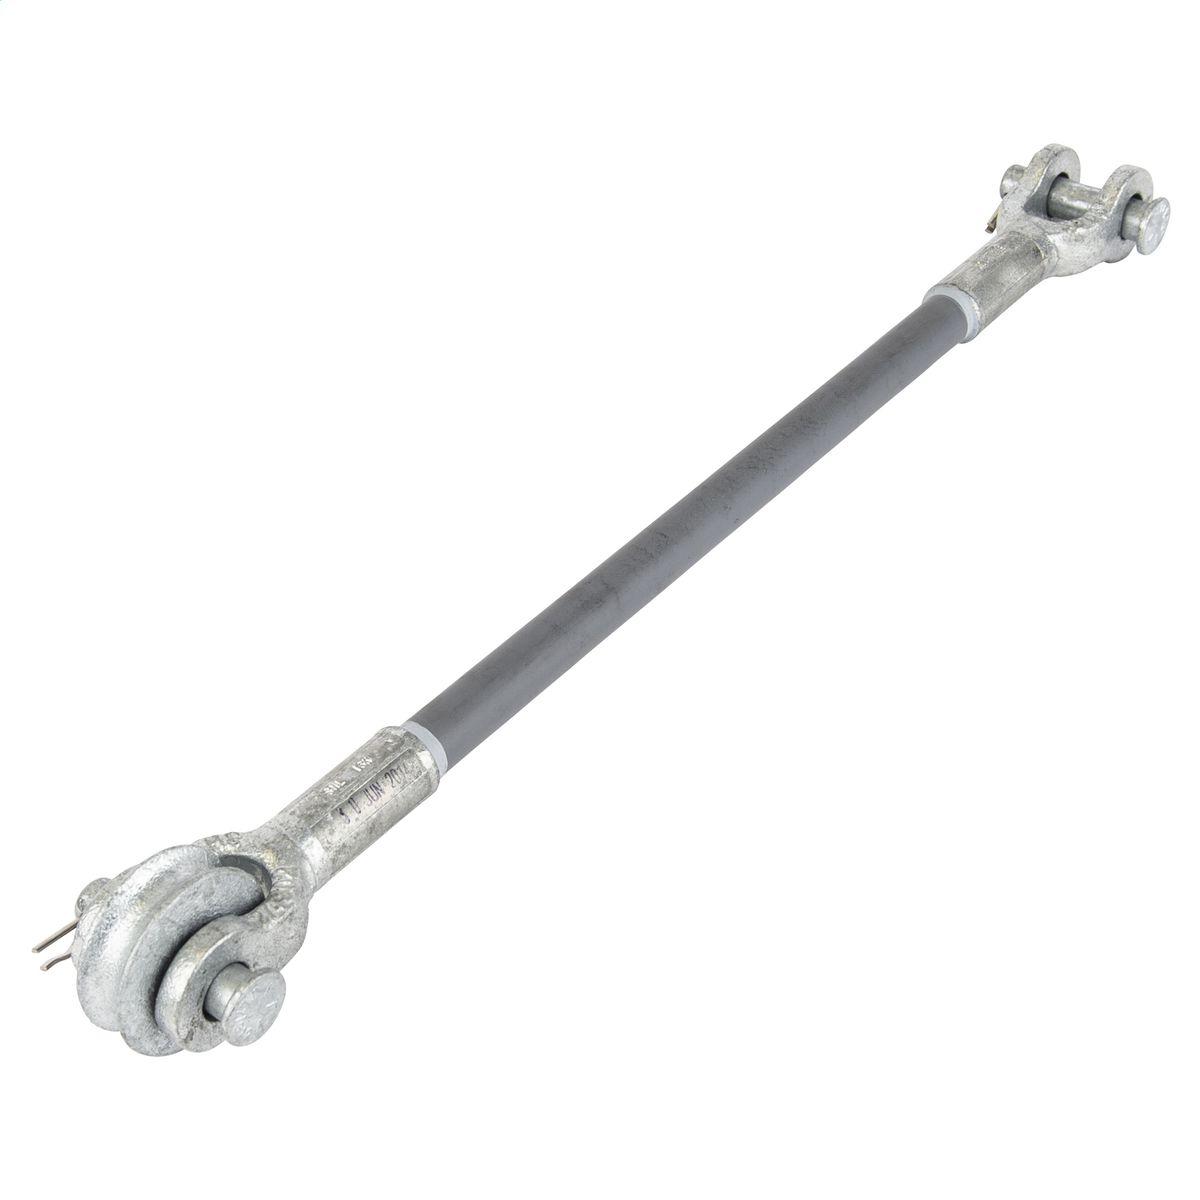 Hubbell GS16012CC1SC 12" Silicone Coated Fiberglass Guy Strain; 16,000 lb Series; Clevis / Clevis + 1 Roller 